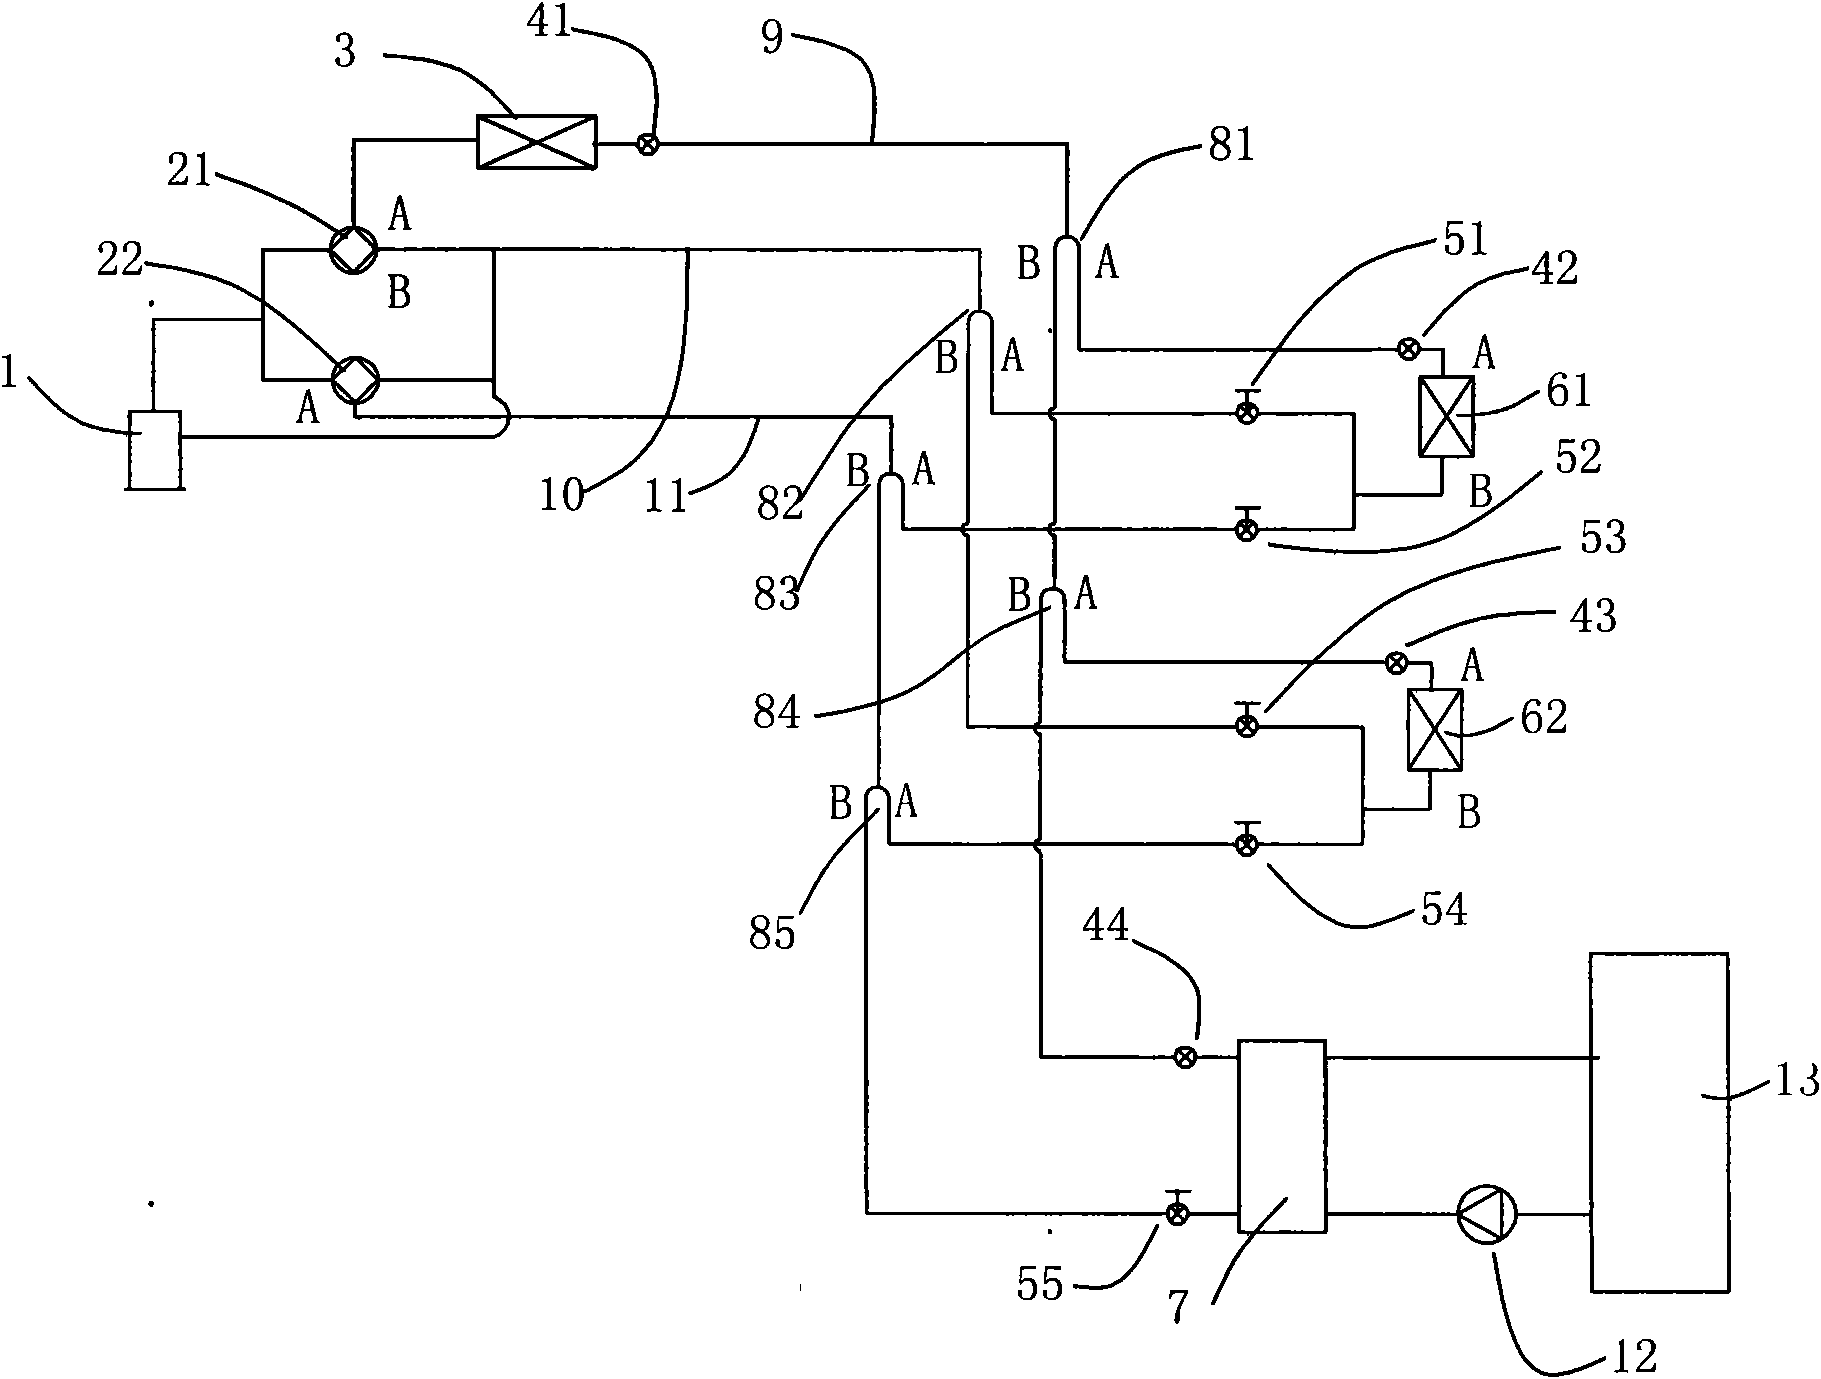 Multiple heat pump air-conditioning water heater